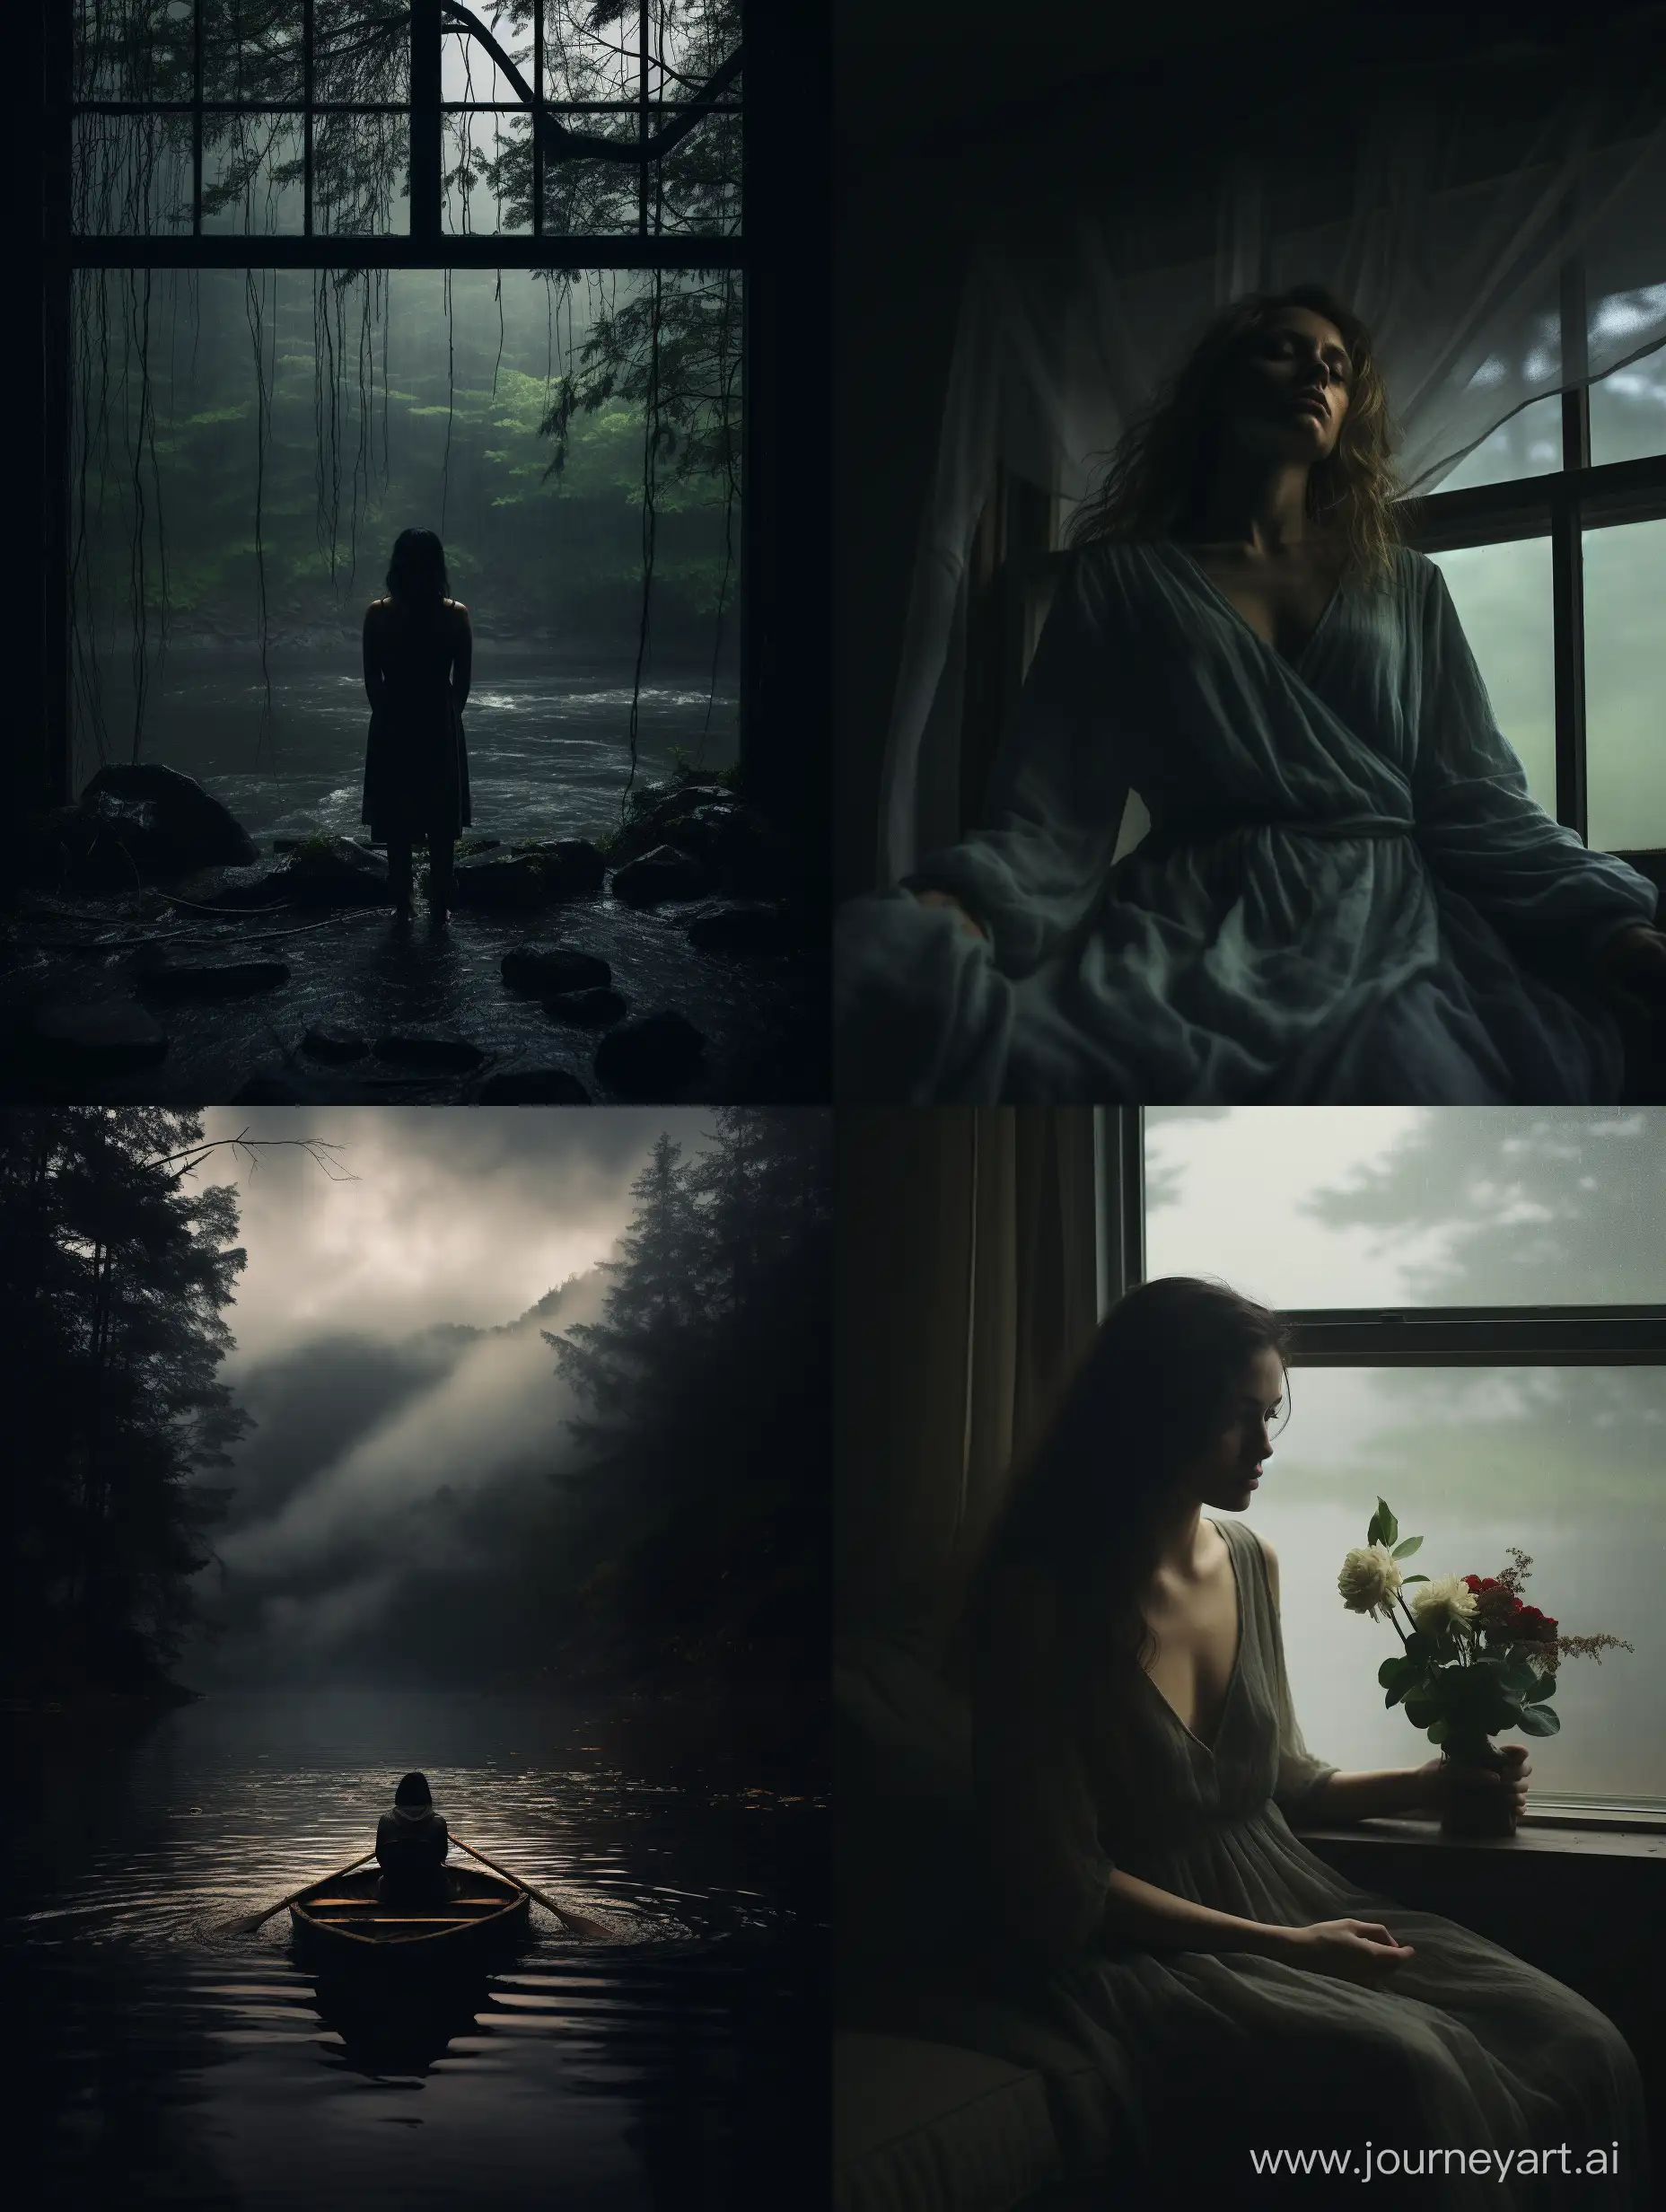 Nature , a sense of drama, mystery, or intensity, adding depth to the visual storytelling and engaging viewers on an emotional level,Moody cinematic photography often utilizes low-key lighting, shadow play, and muted color palettes to evoke a specific emotional atmosphere.